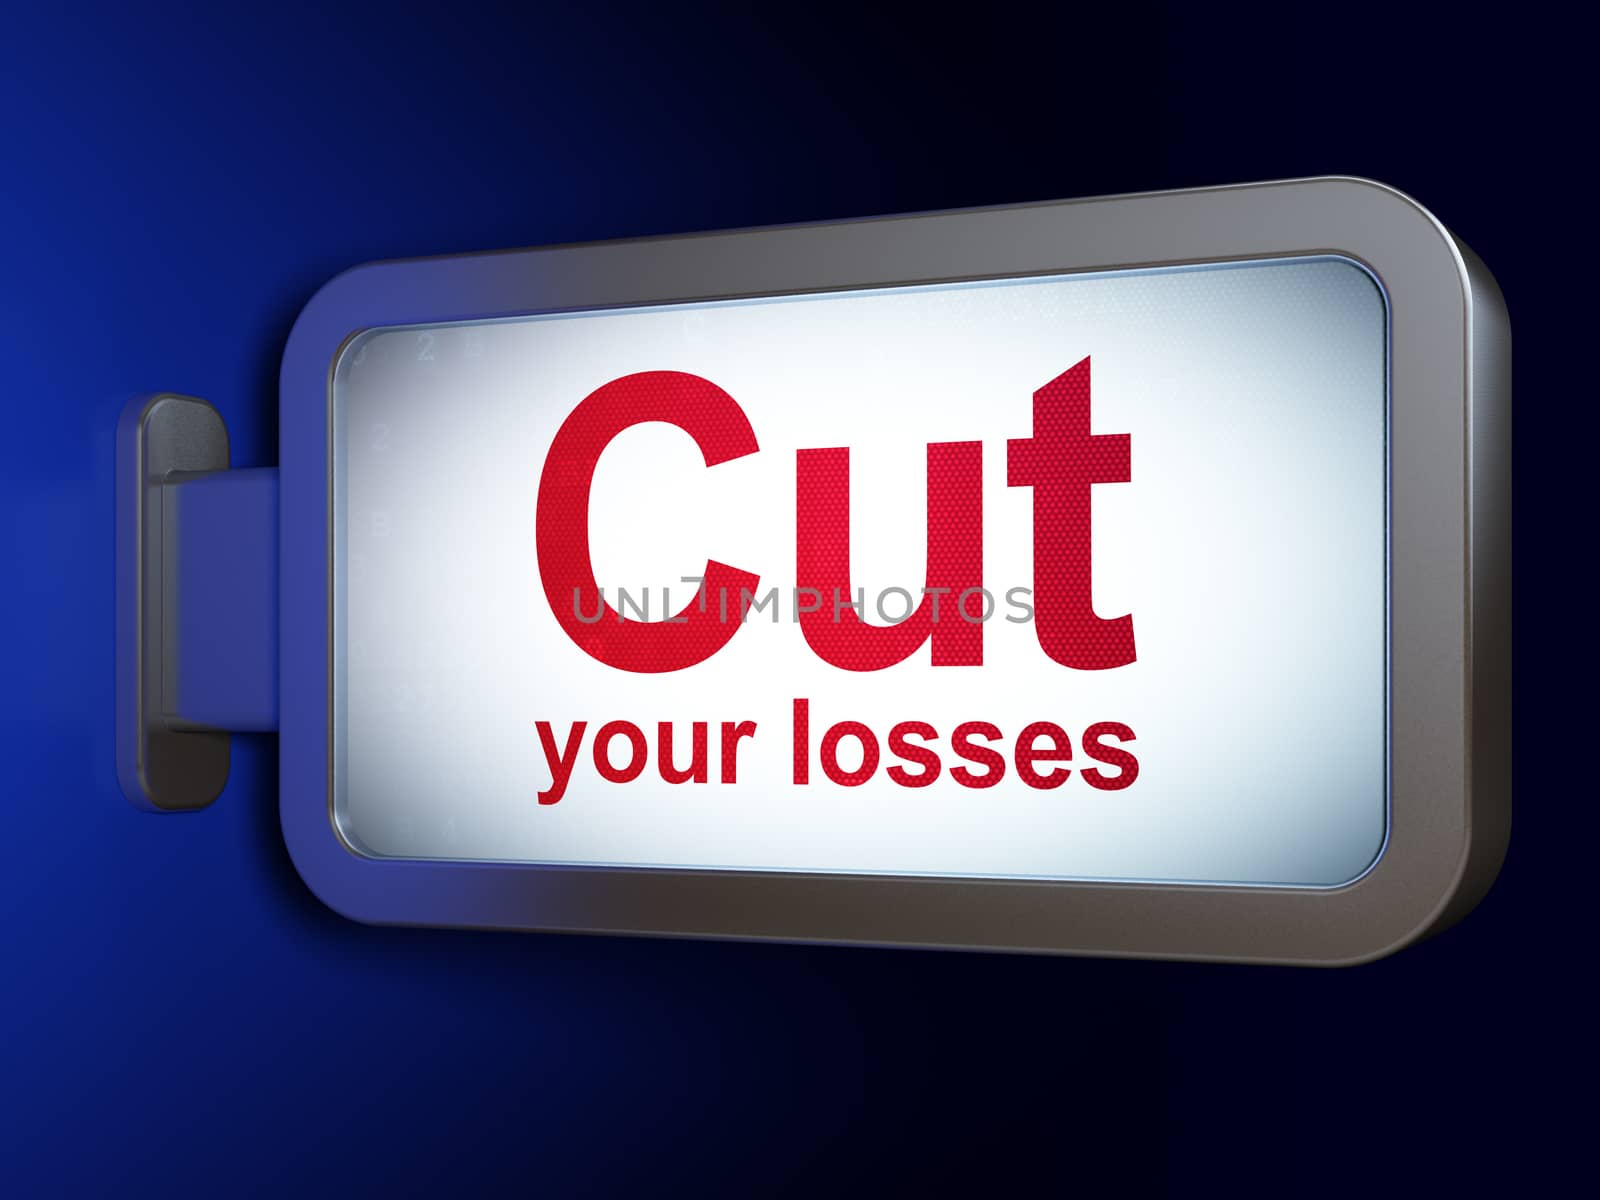 Finance concept: Cut Your losses on advertising billboard background, 3D rendering